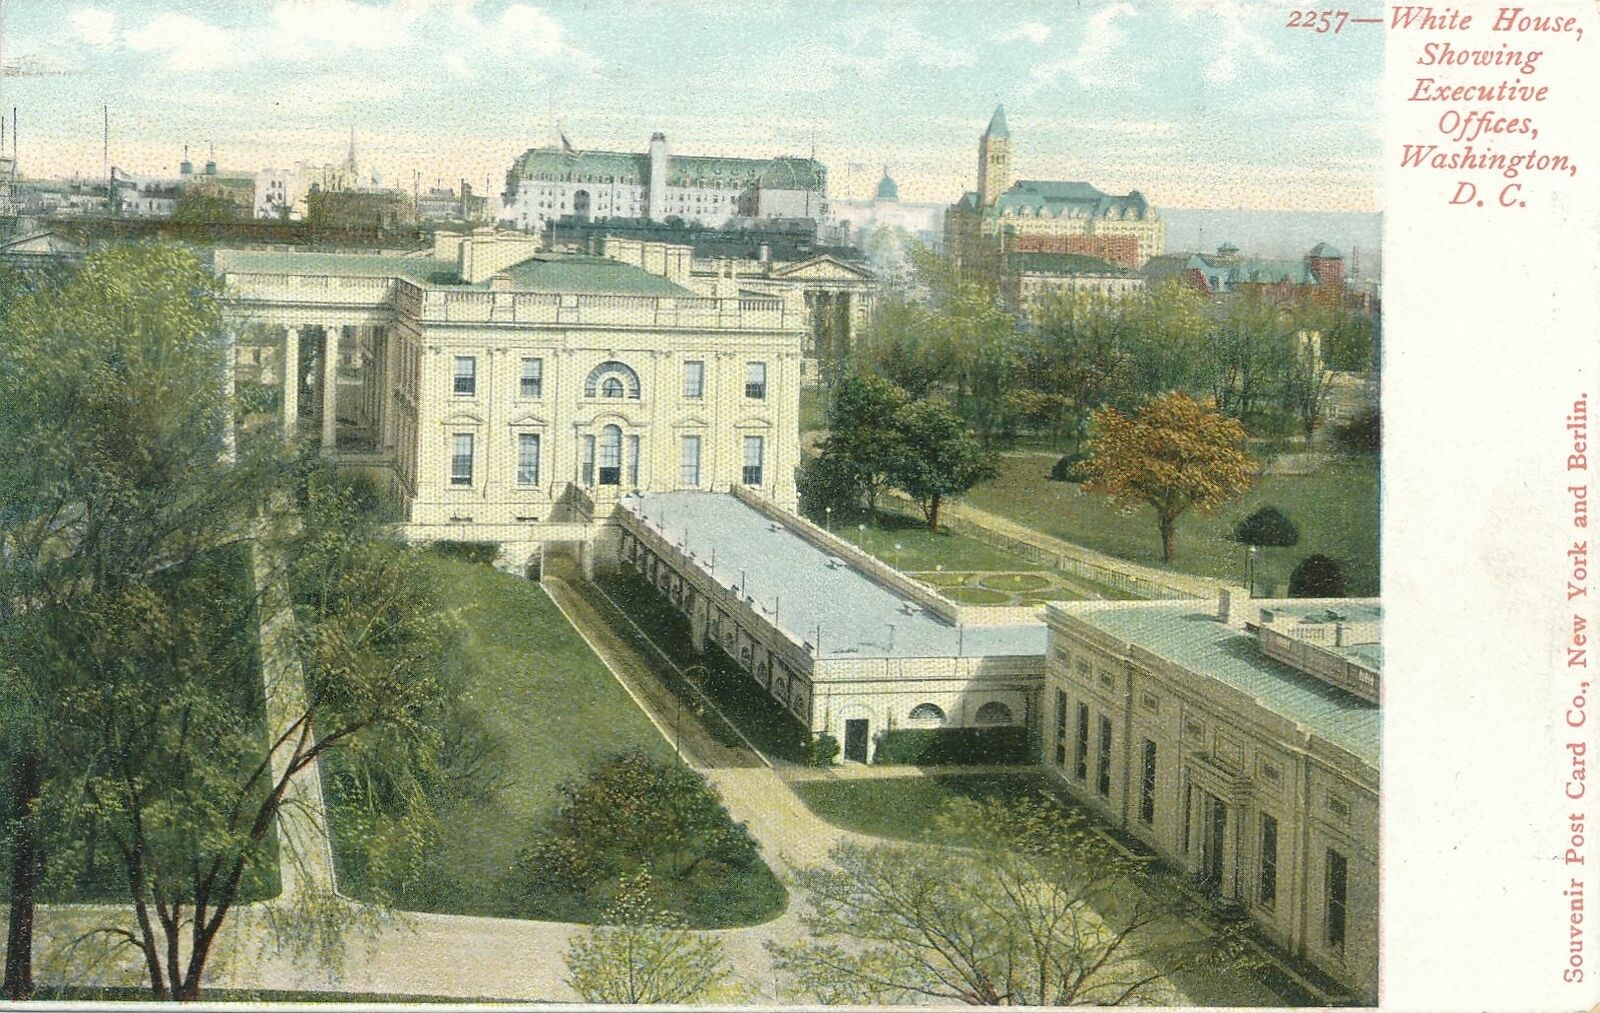 WASHINGTON DC - White House showing Executive Offices - udb (pre 1908)